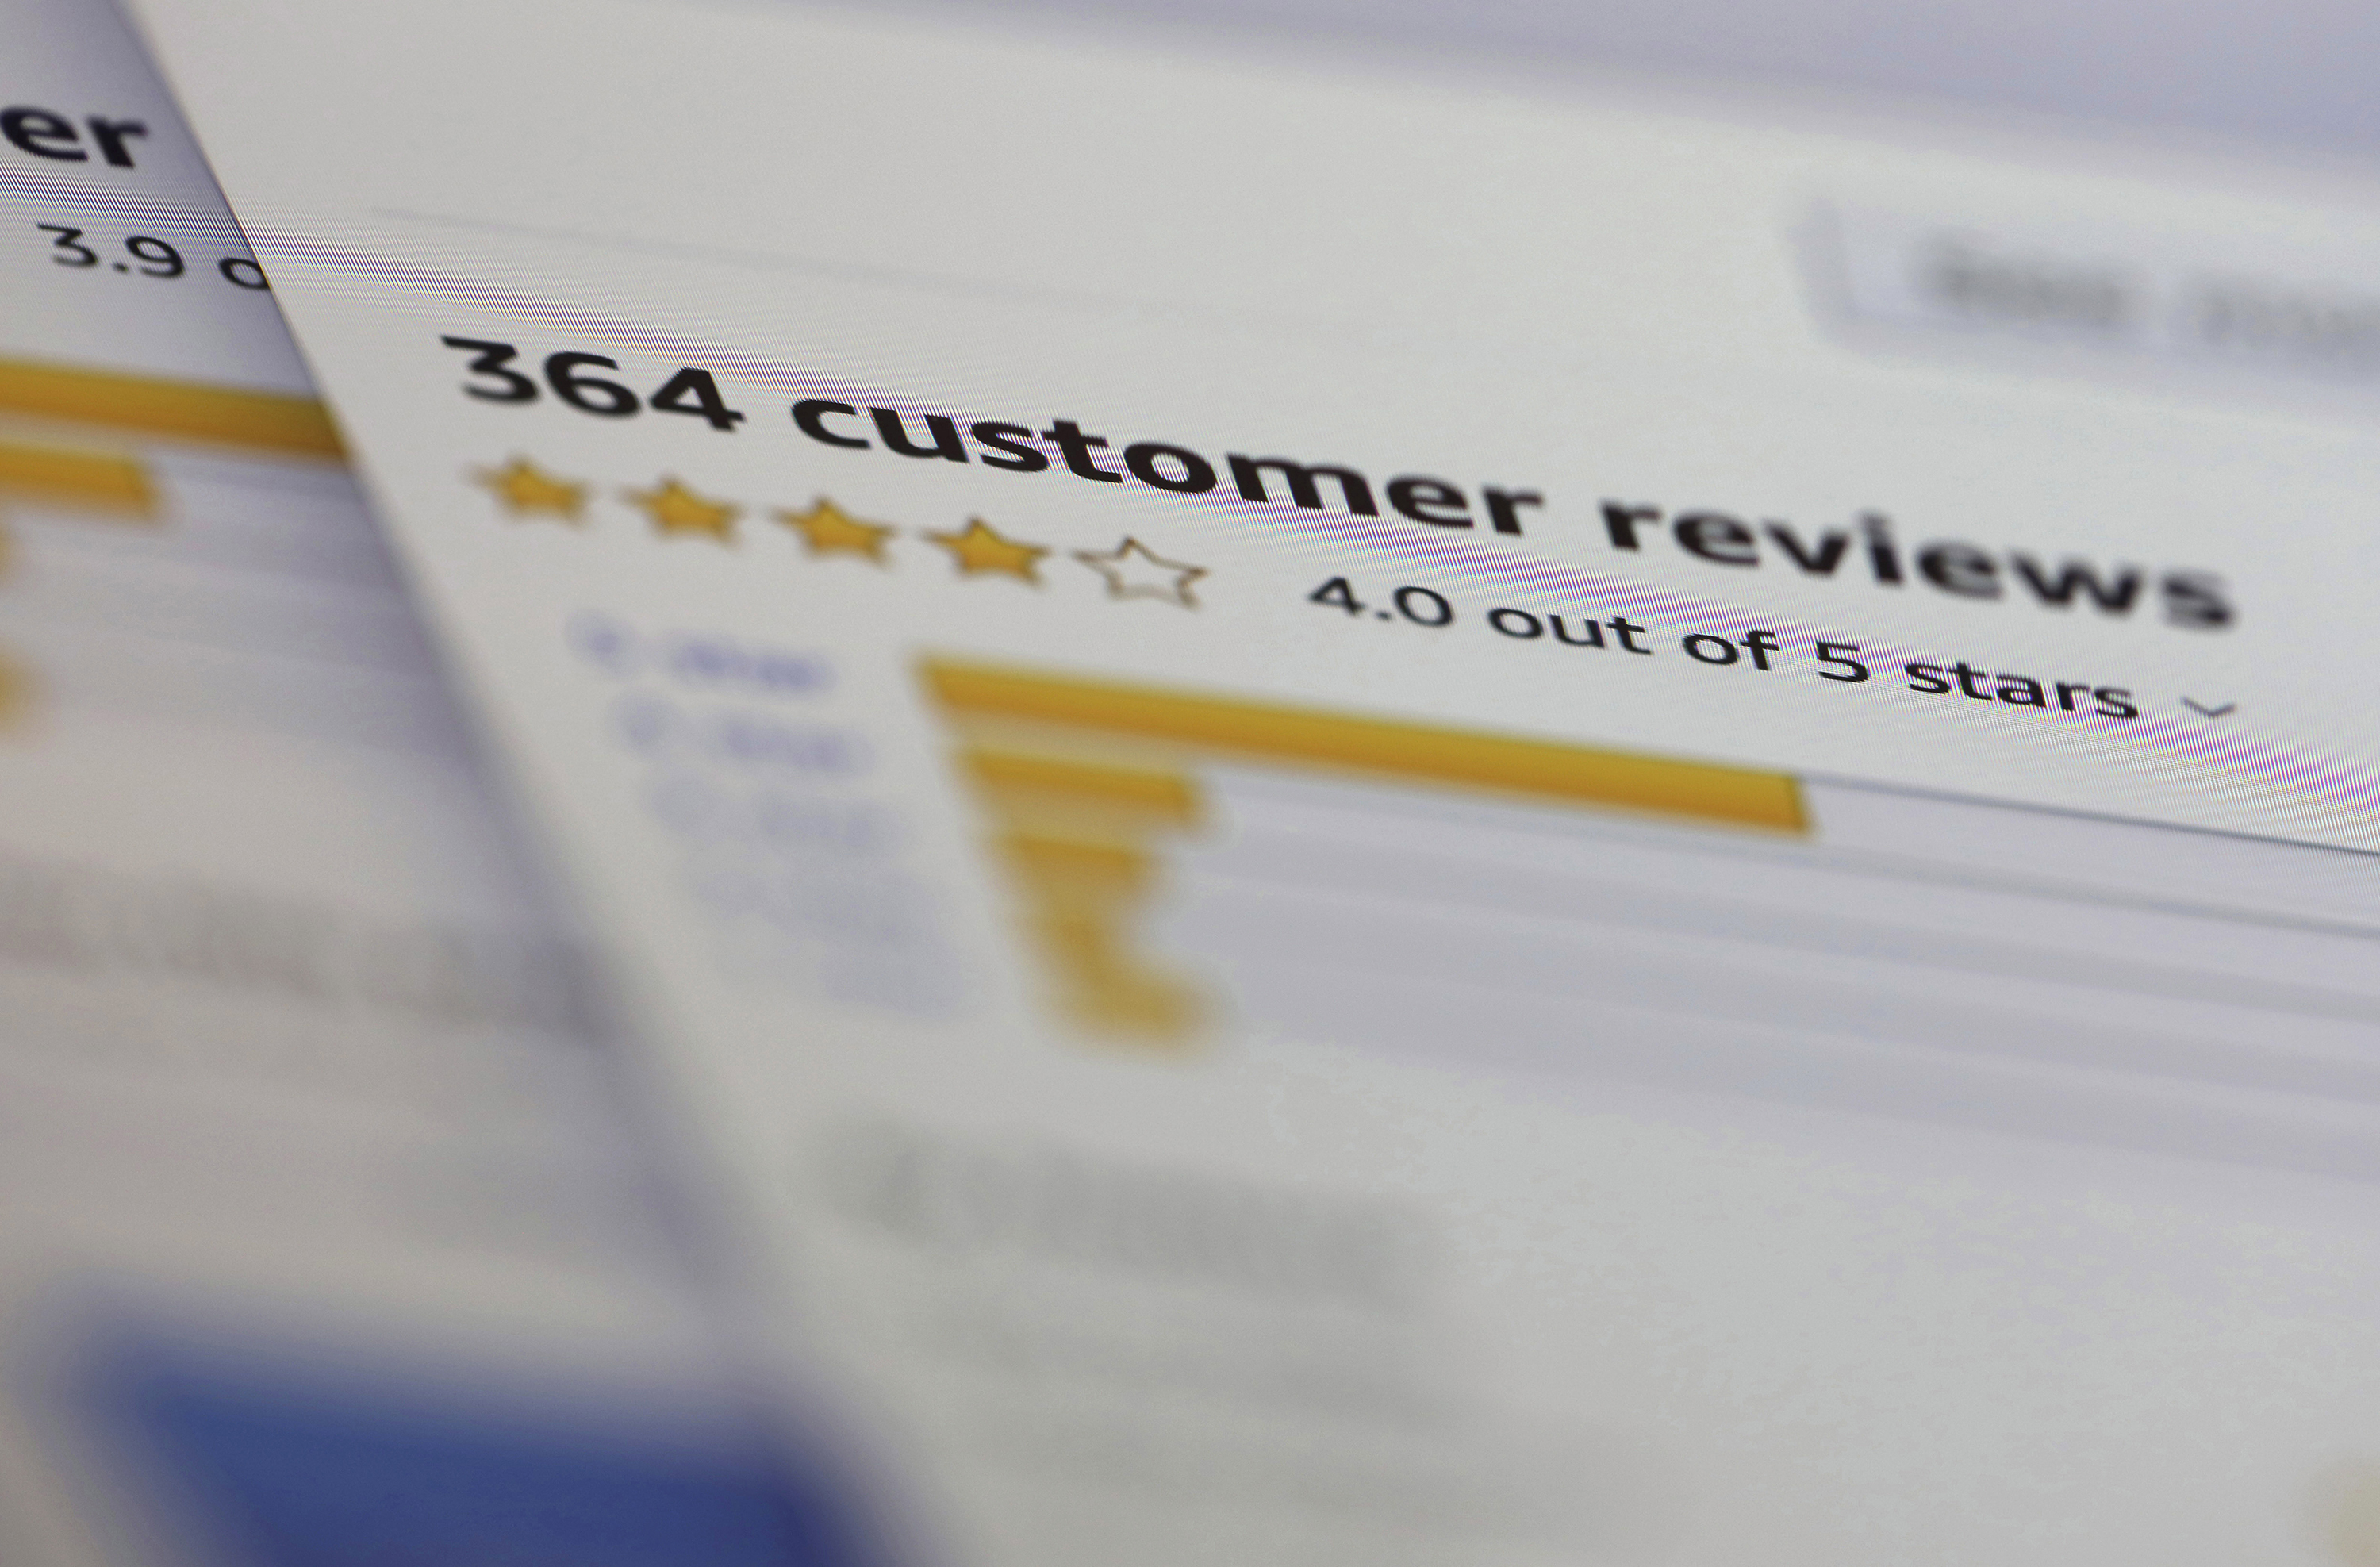 The critical role of reviews in Internet trust - Trustpilot Business Blog